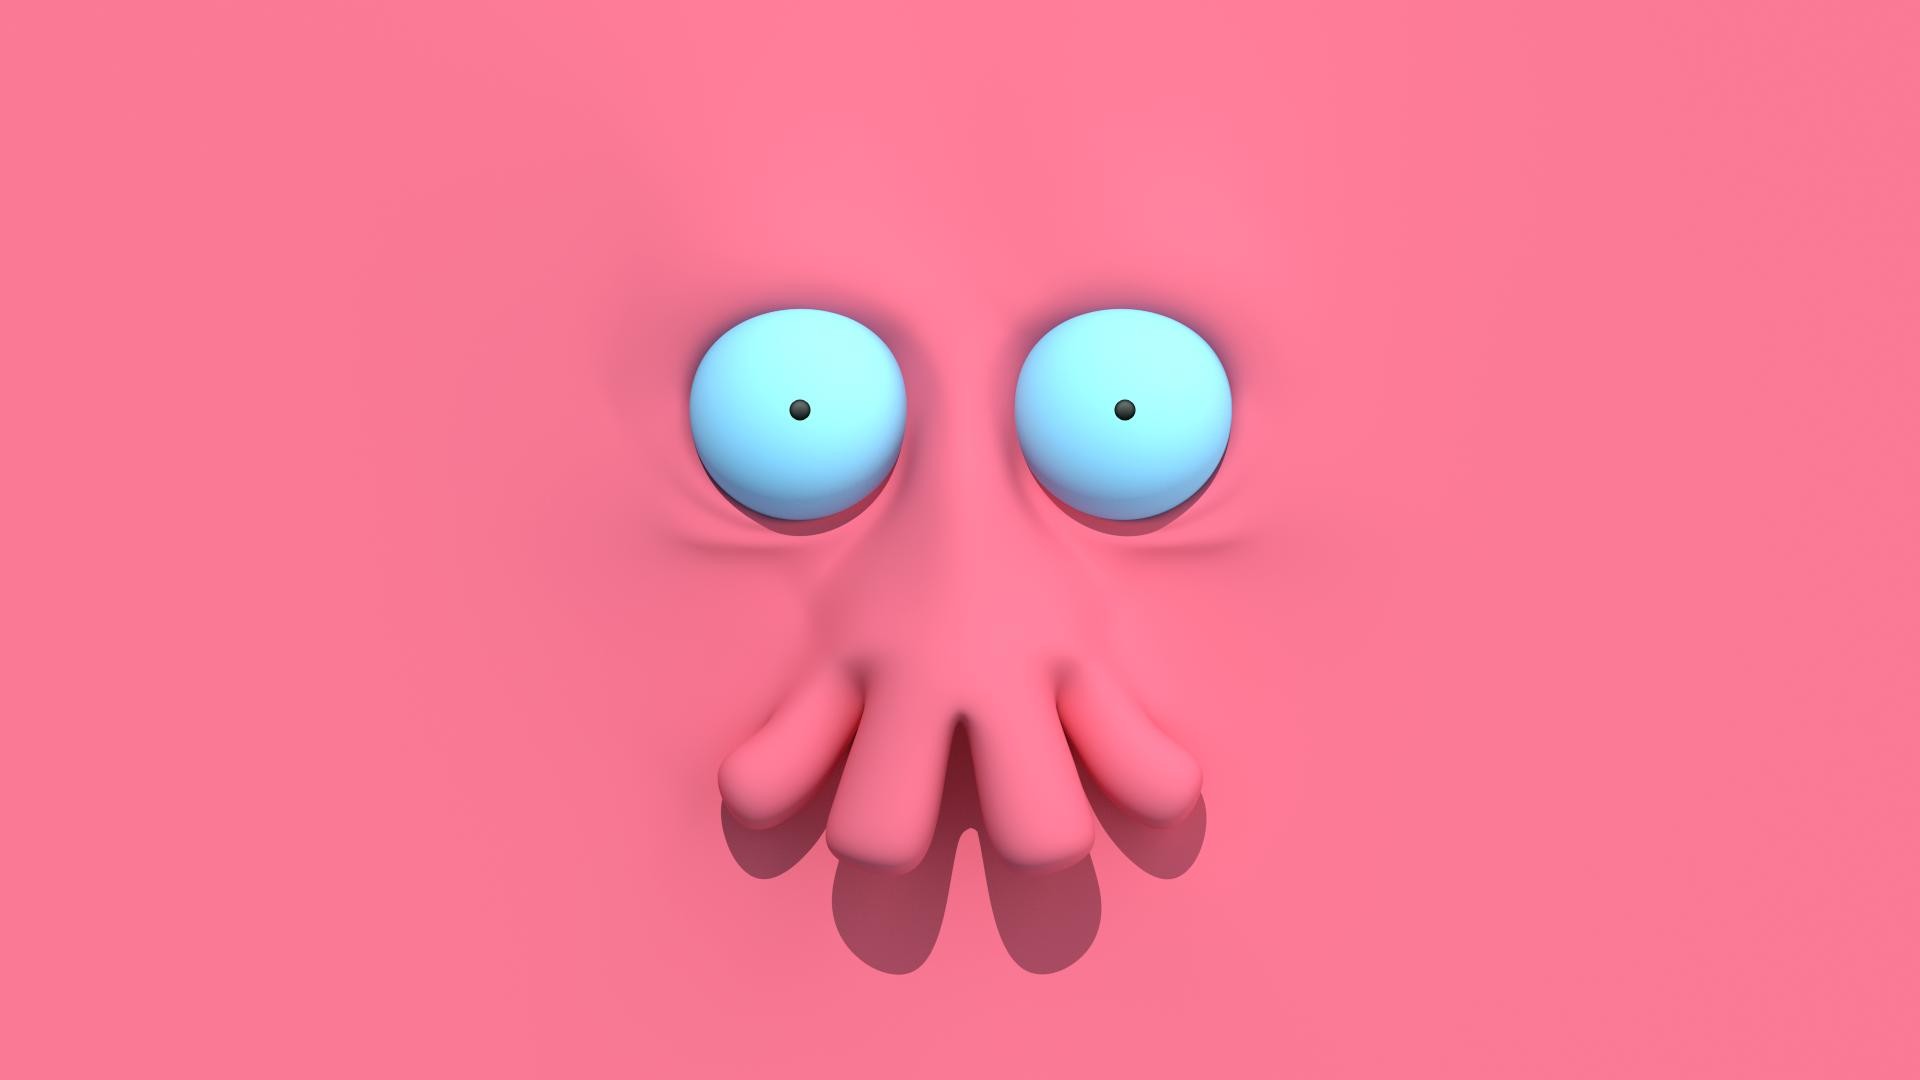 1920x1080 Need a new wallpaper? Why not 3D Zoidberg?